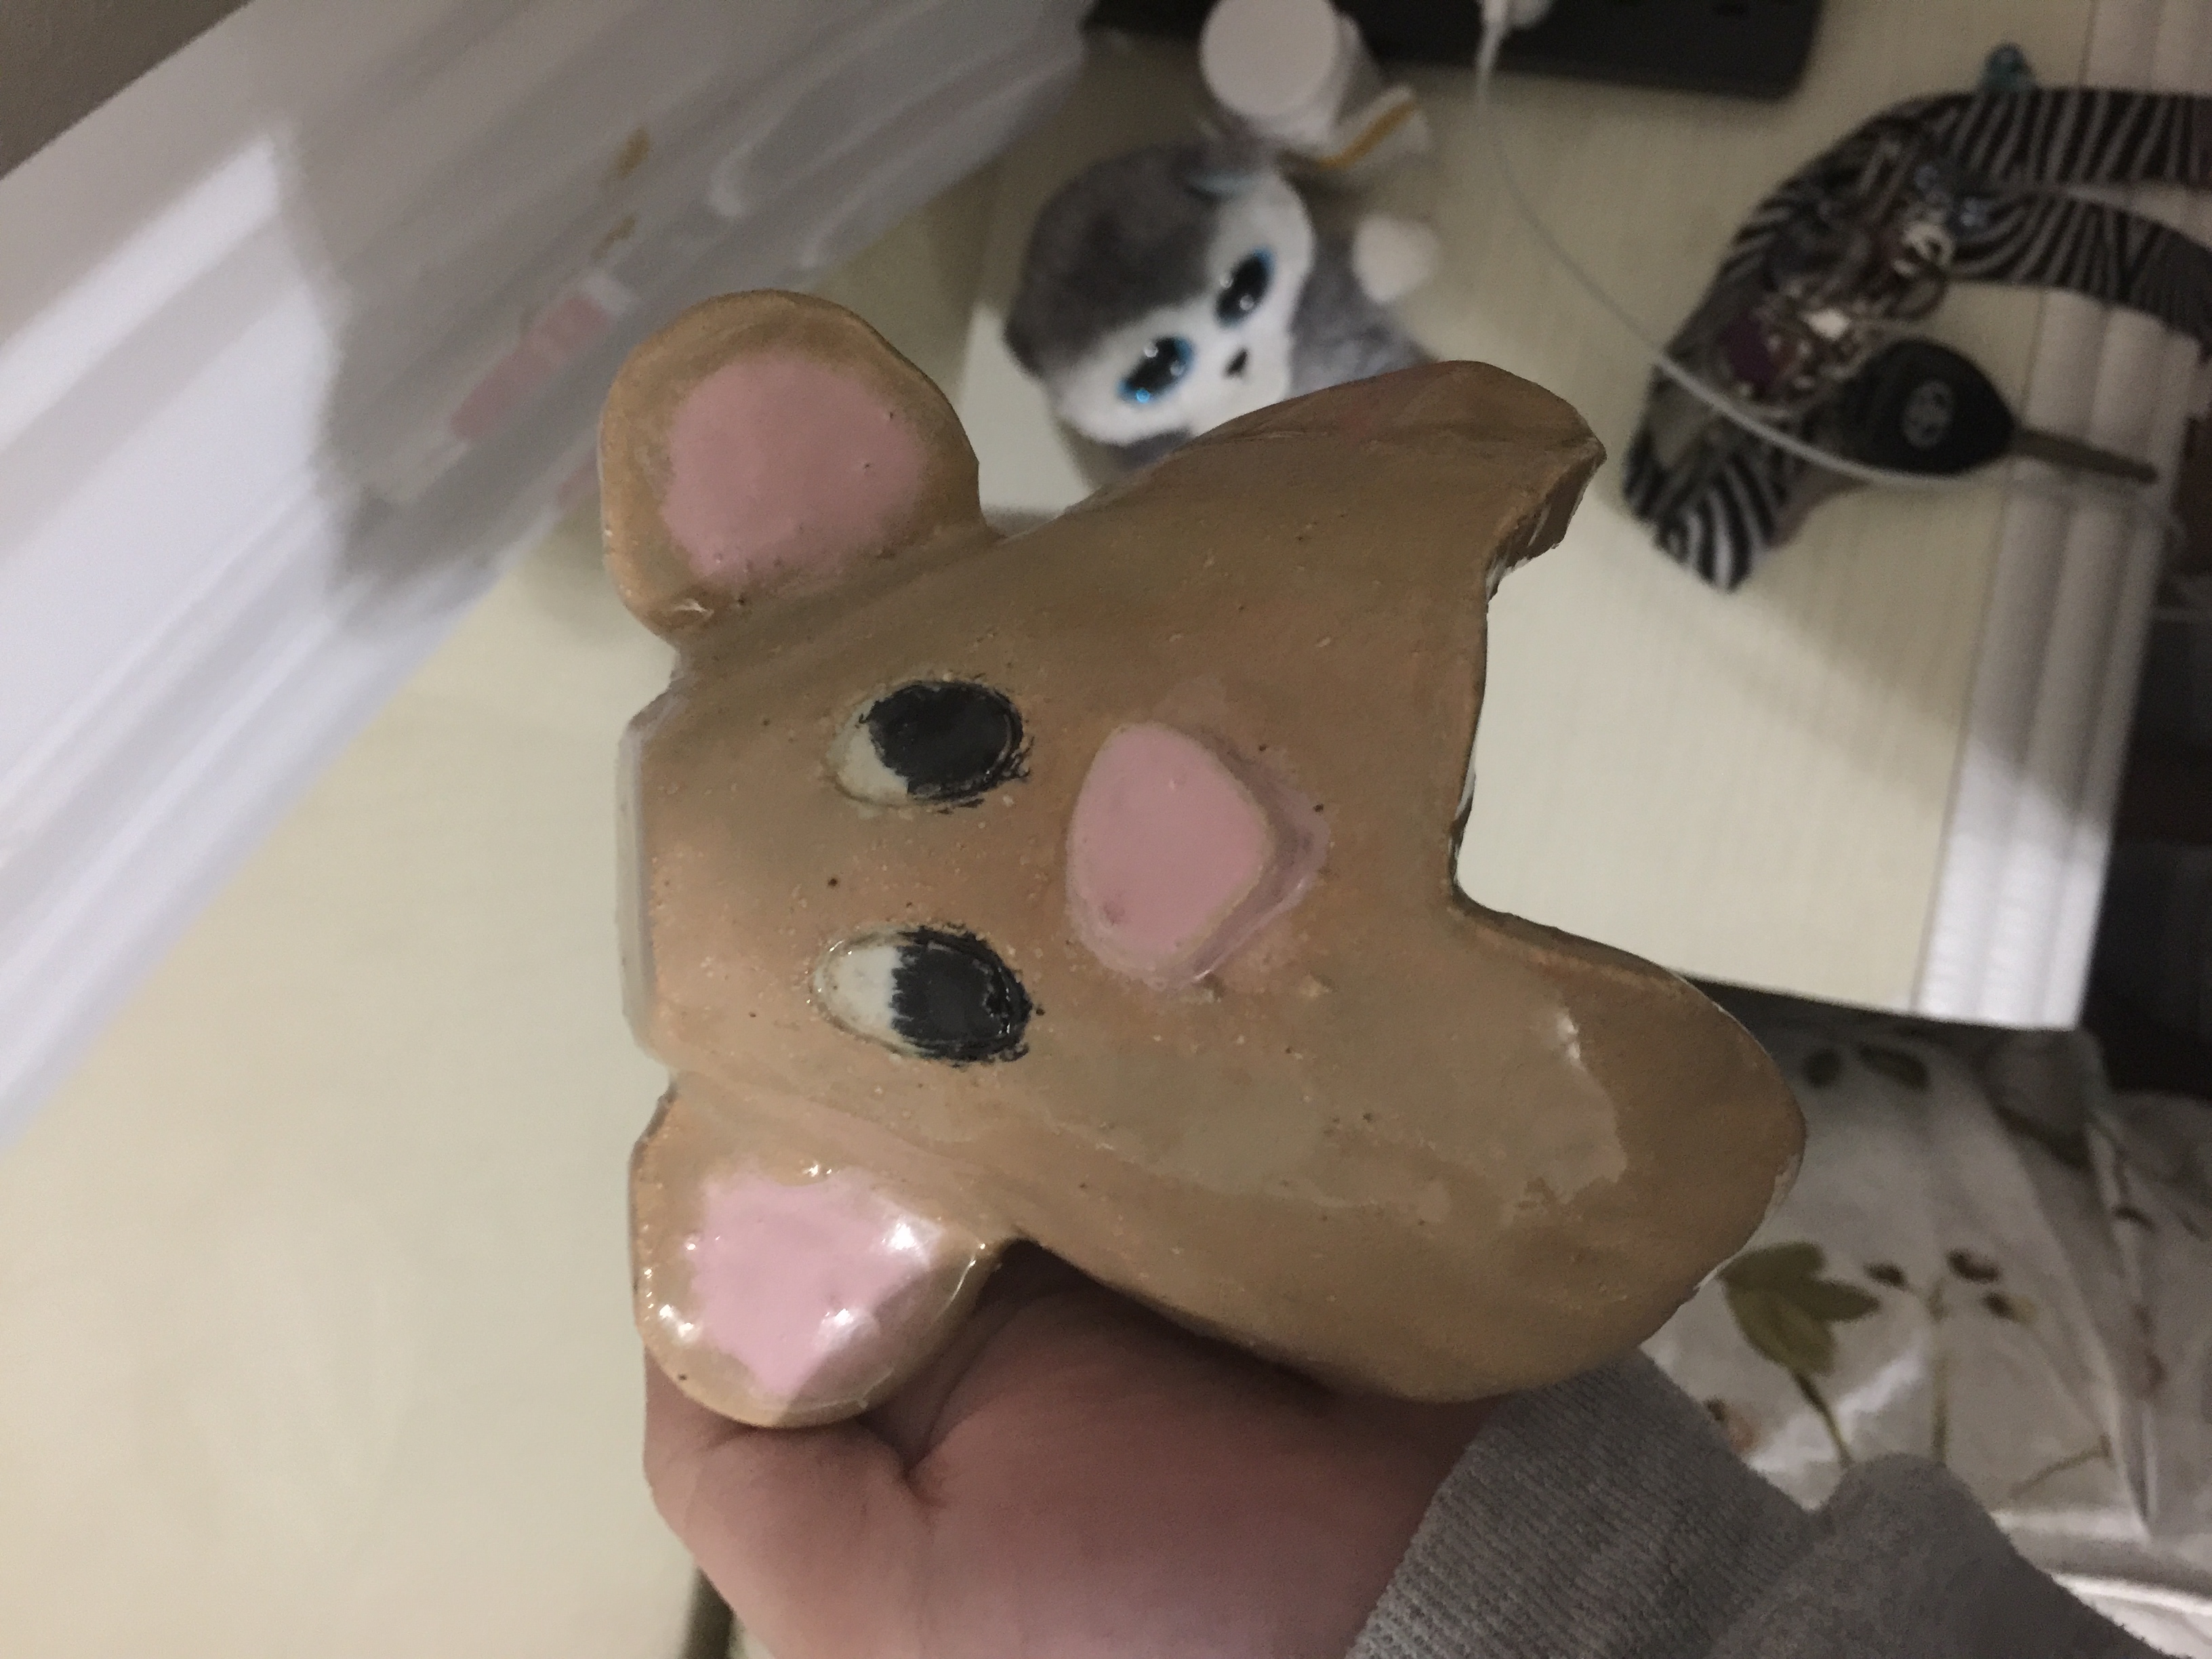 a bear crafted ceramic, brown with heart shape indentwith pink nose